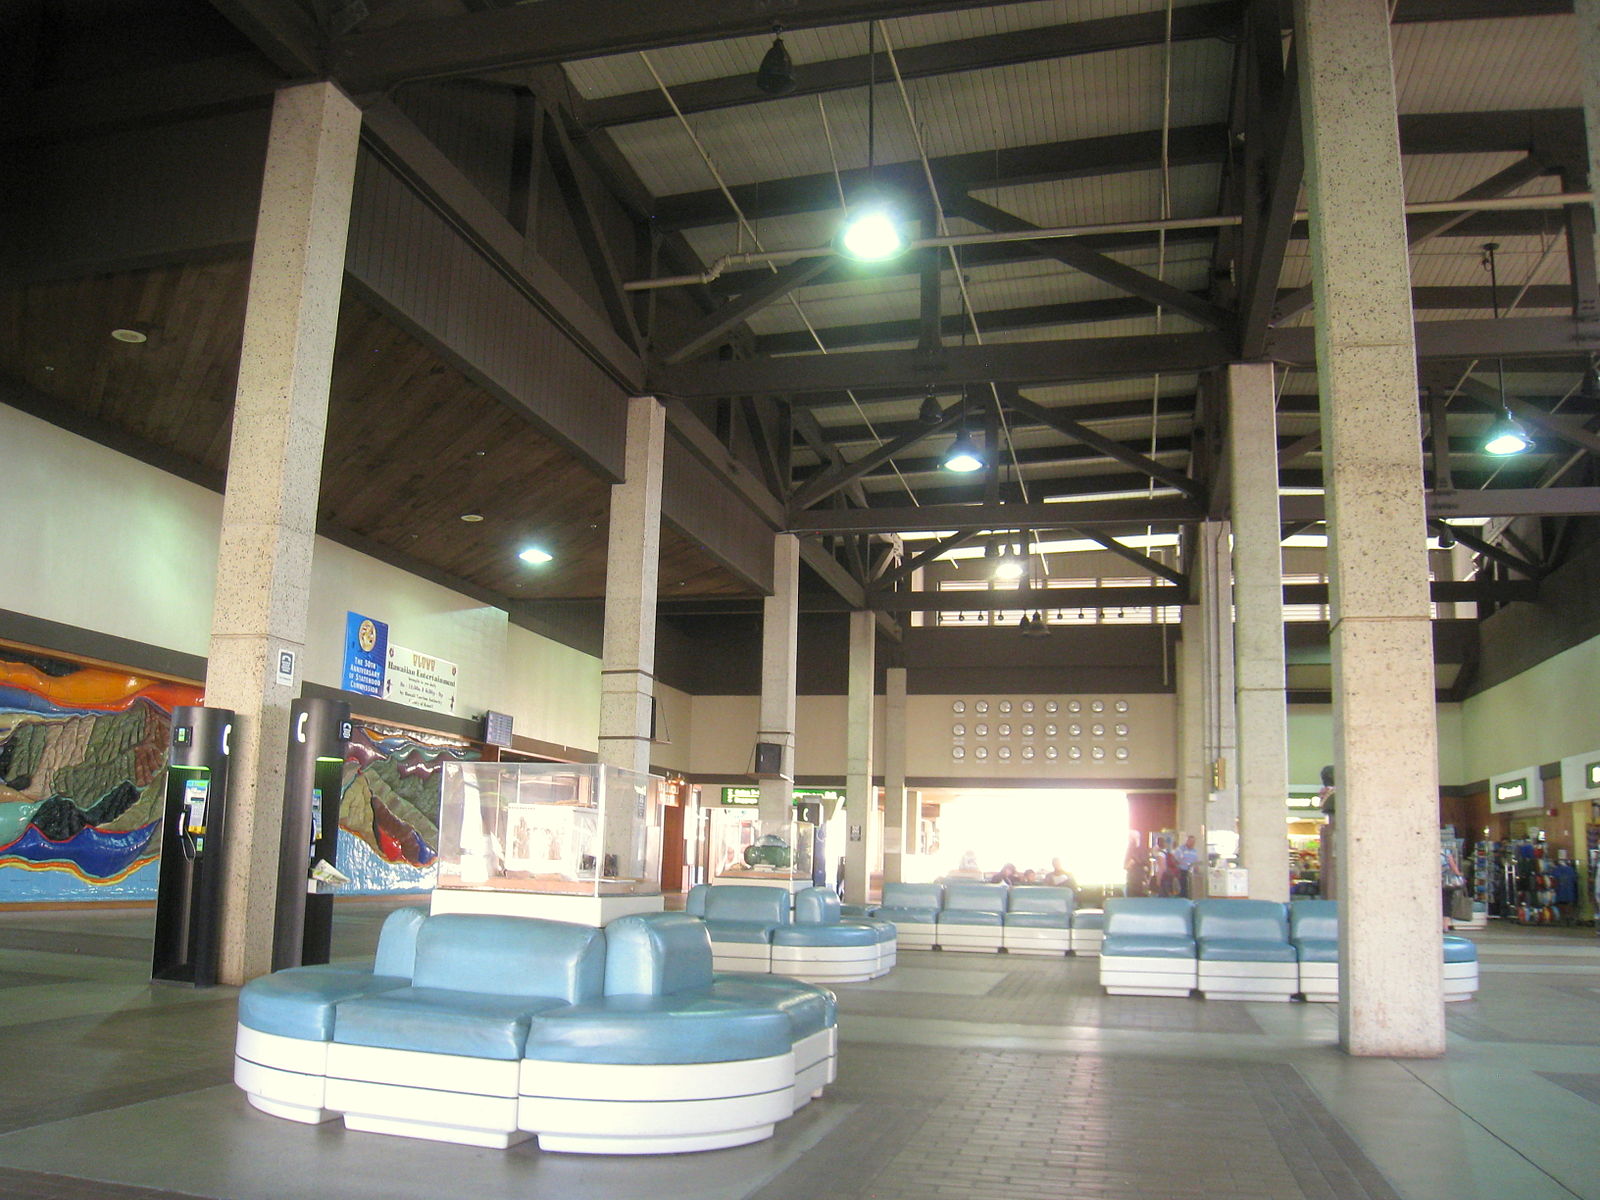 Lihue Airport consists of a single terminal.